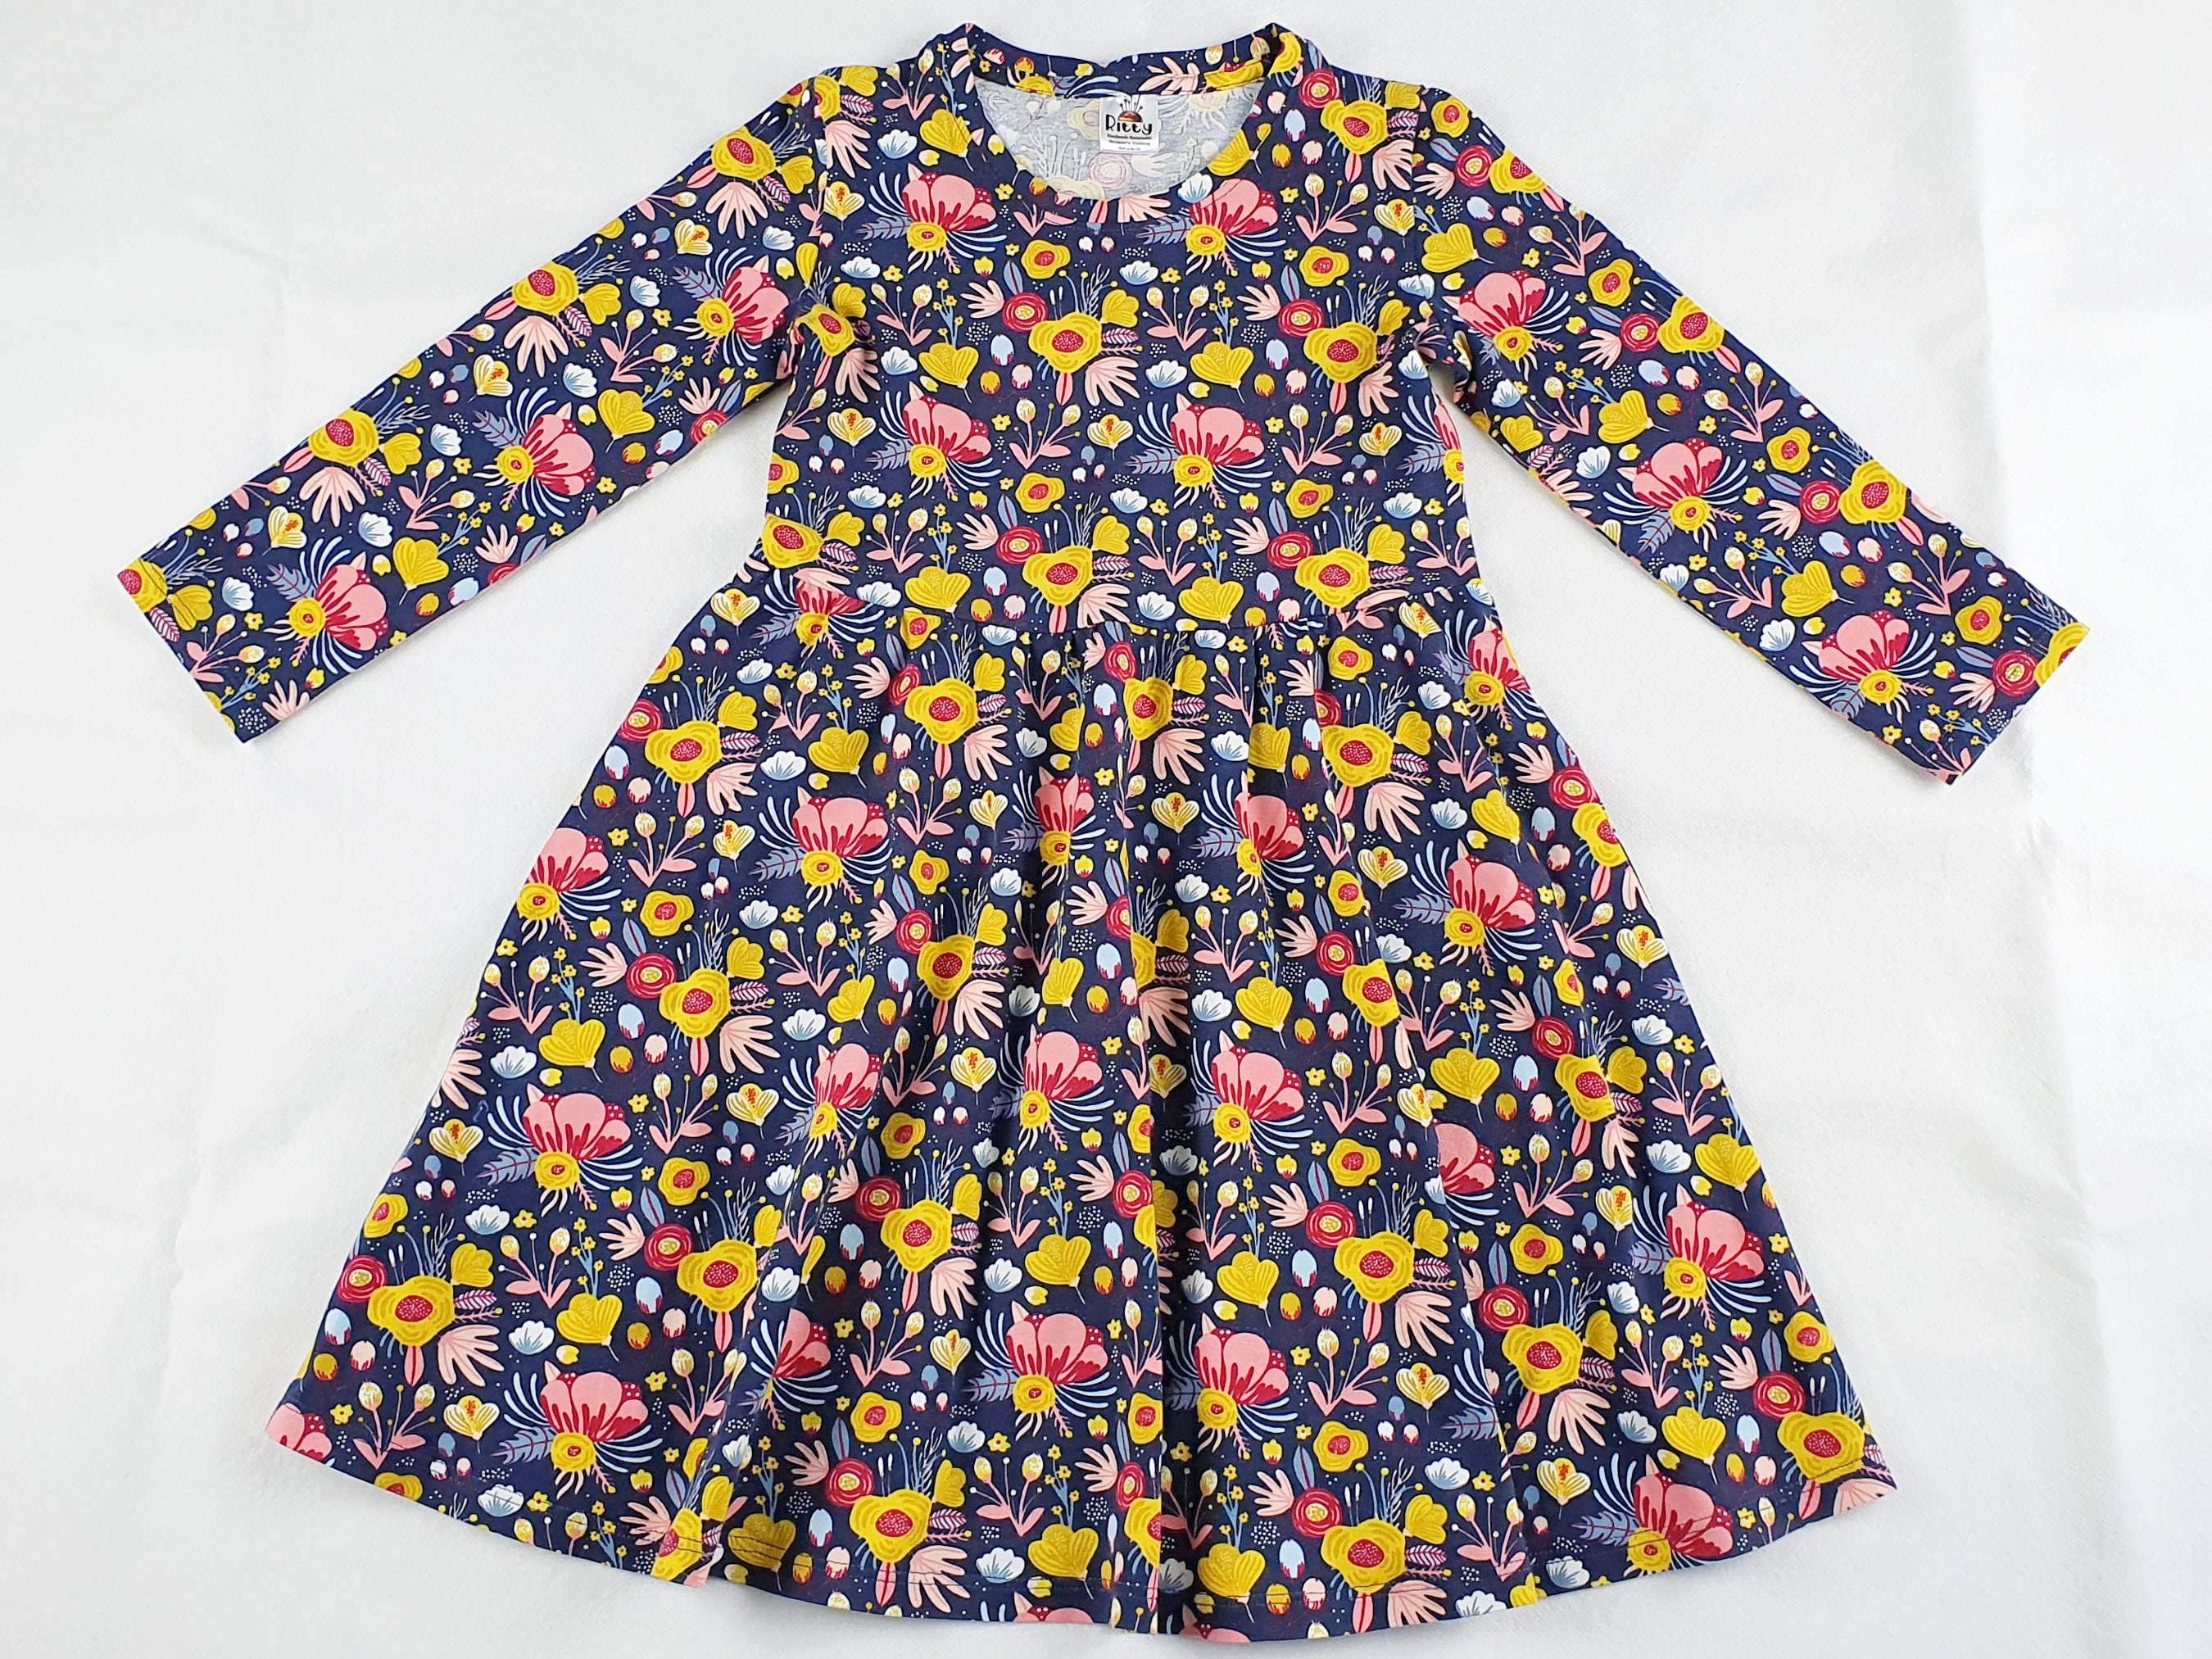 4 Years Old Girl Dress Girl Jersey Dress Little Girl Dress Organic Cotton Jersey Dress Dark Blue Navy Painting Floral Girl dress